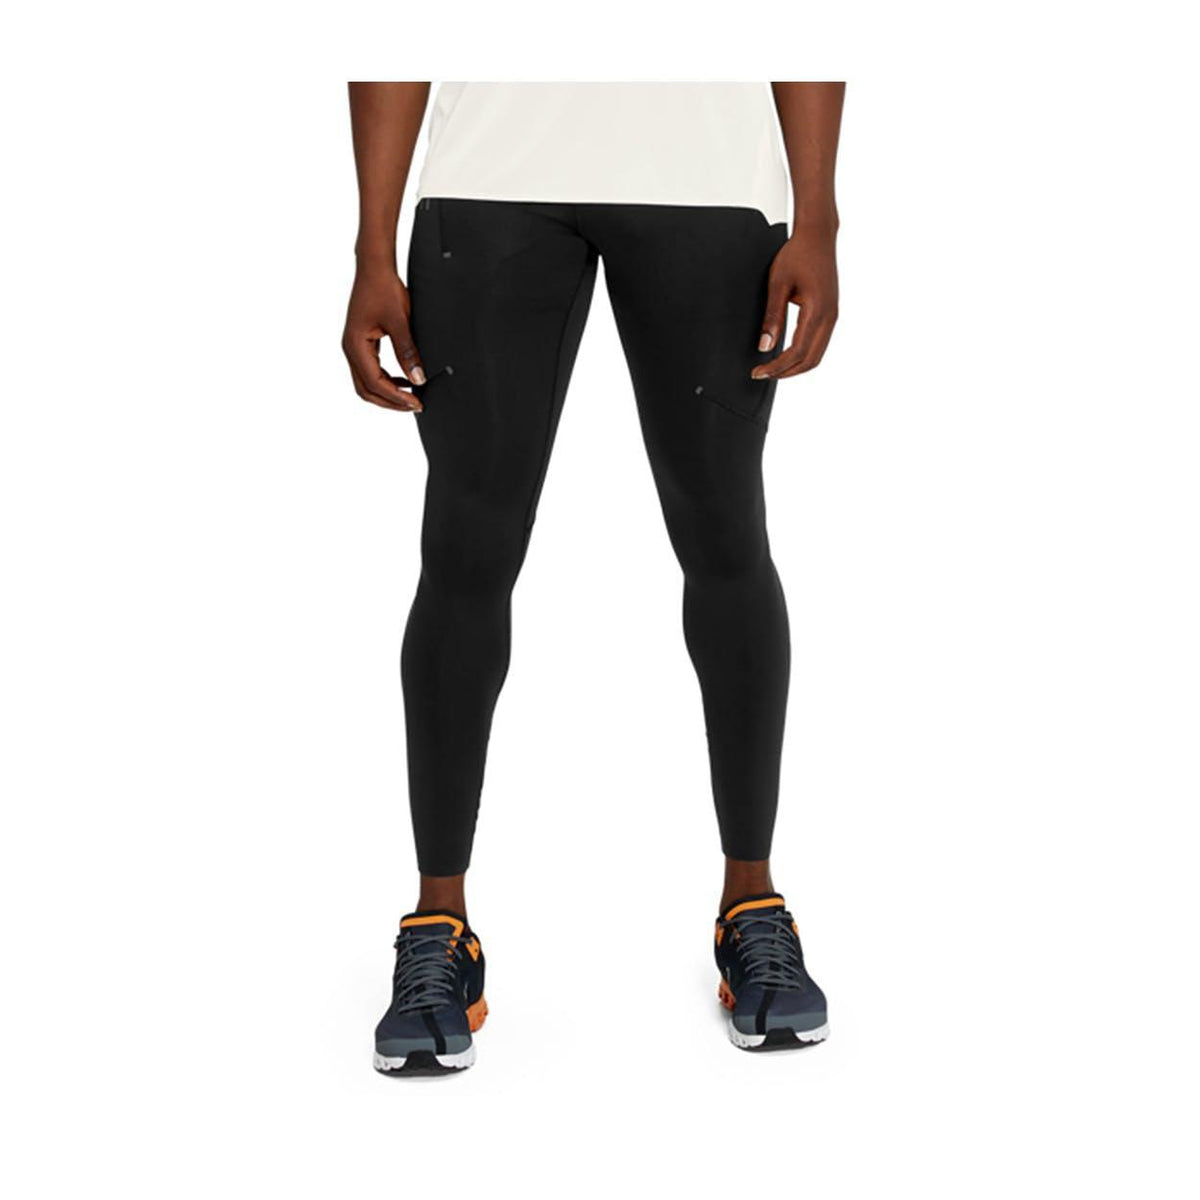 On-Men's On Performance Tights-Black-Pacers Running